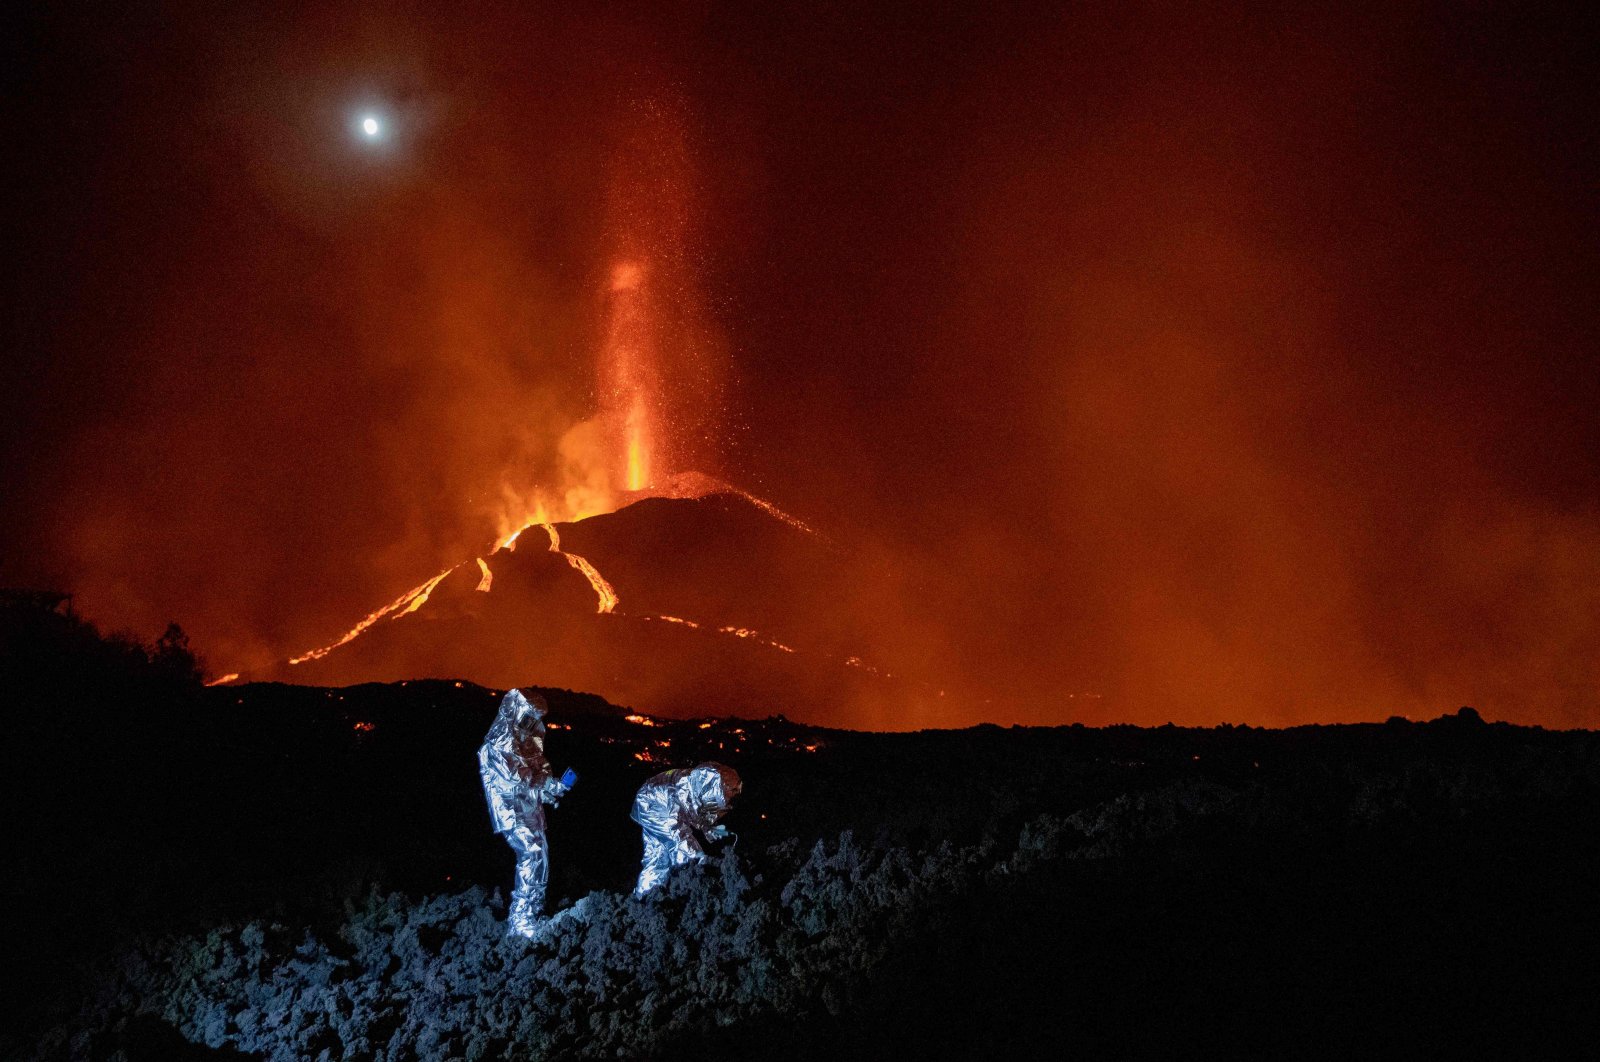 Members of the Spanish Military Emergency Unit (UME) monitor the evolution of a new lava flow from the erupted Cumbre Vieja volcano, on the Canary island of La Palma, Spain, Oct. 16, 2021. (UME via AFP)